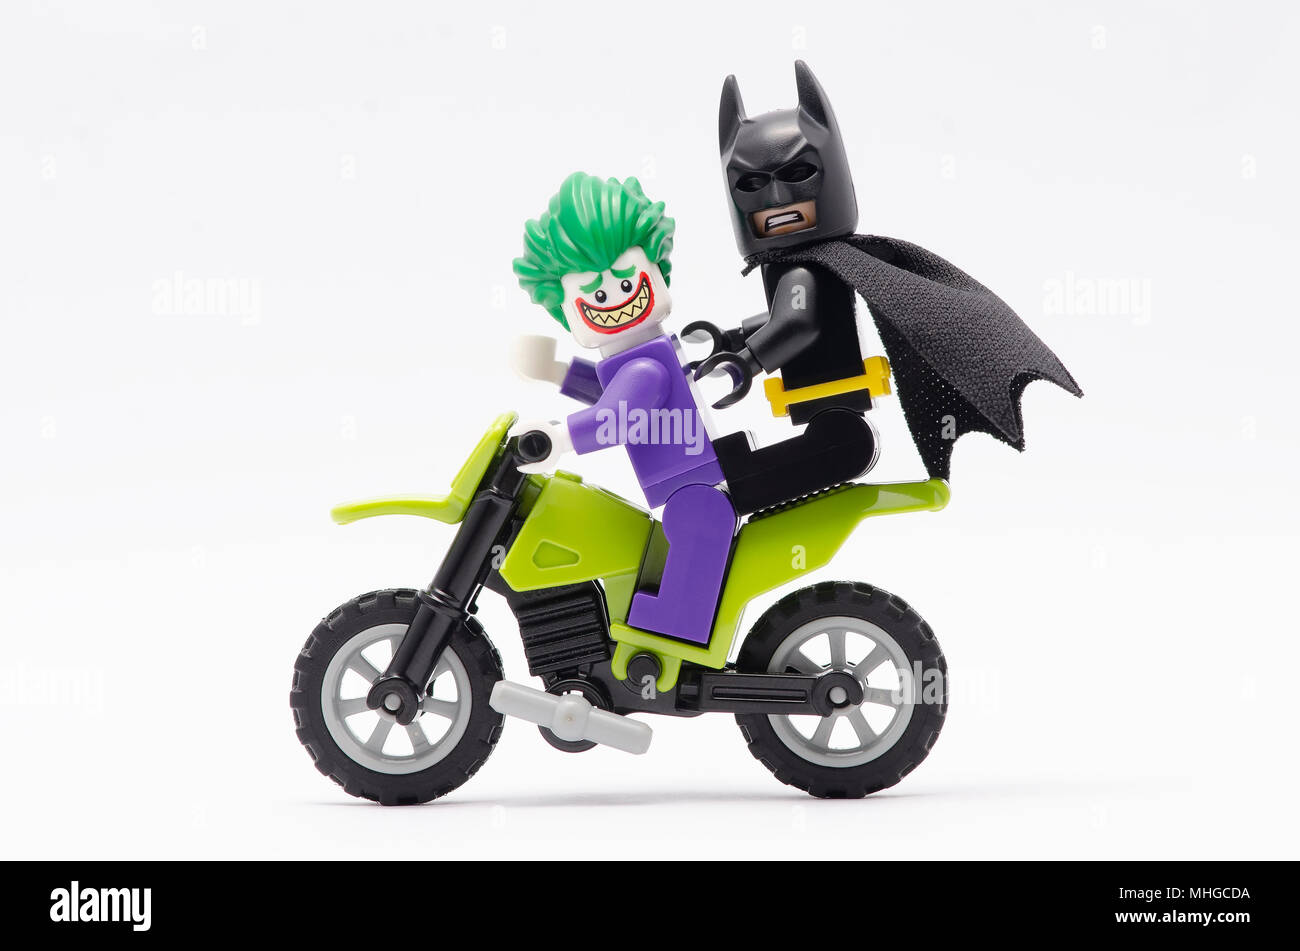 mini figure of joker with batman on her back riding dirt bike. Lego  minifigures are manufactured by The Lego Group Stock Photo - Alamy